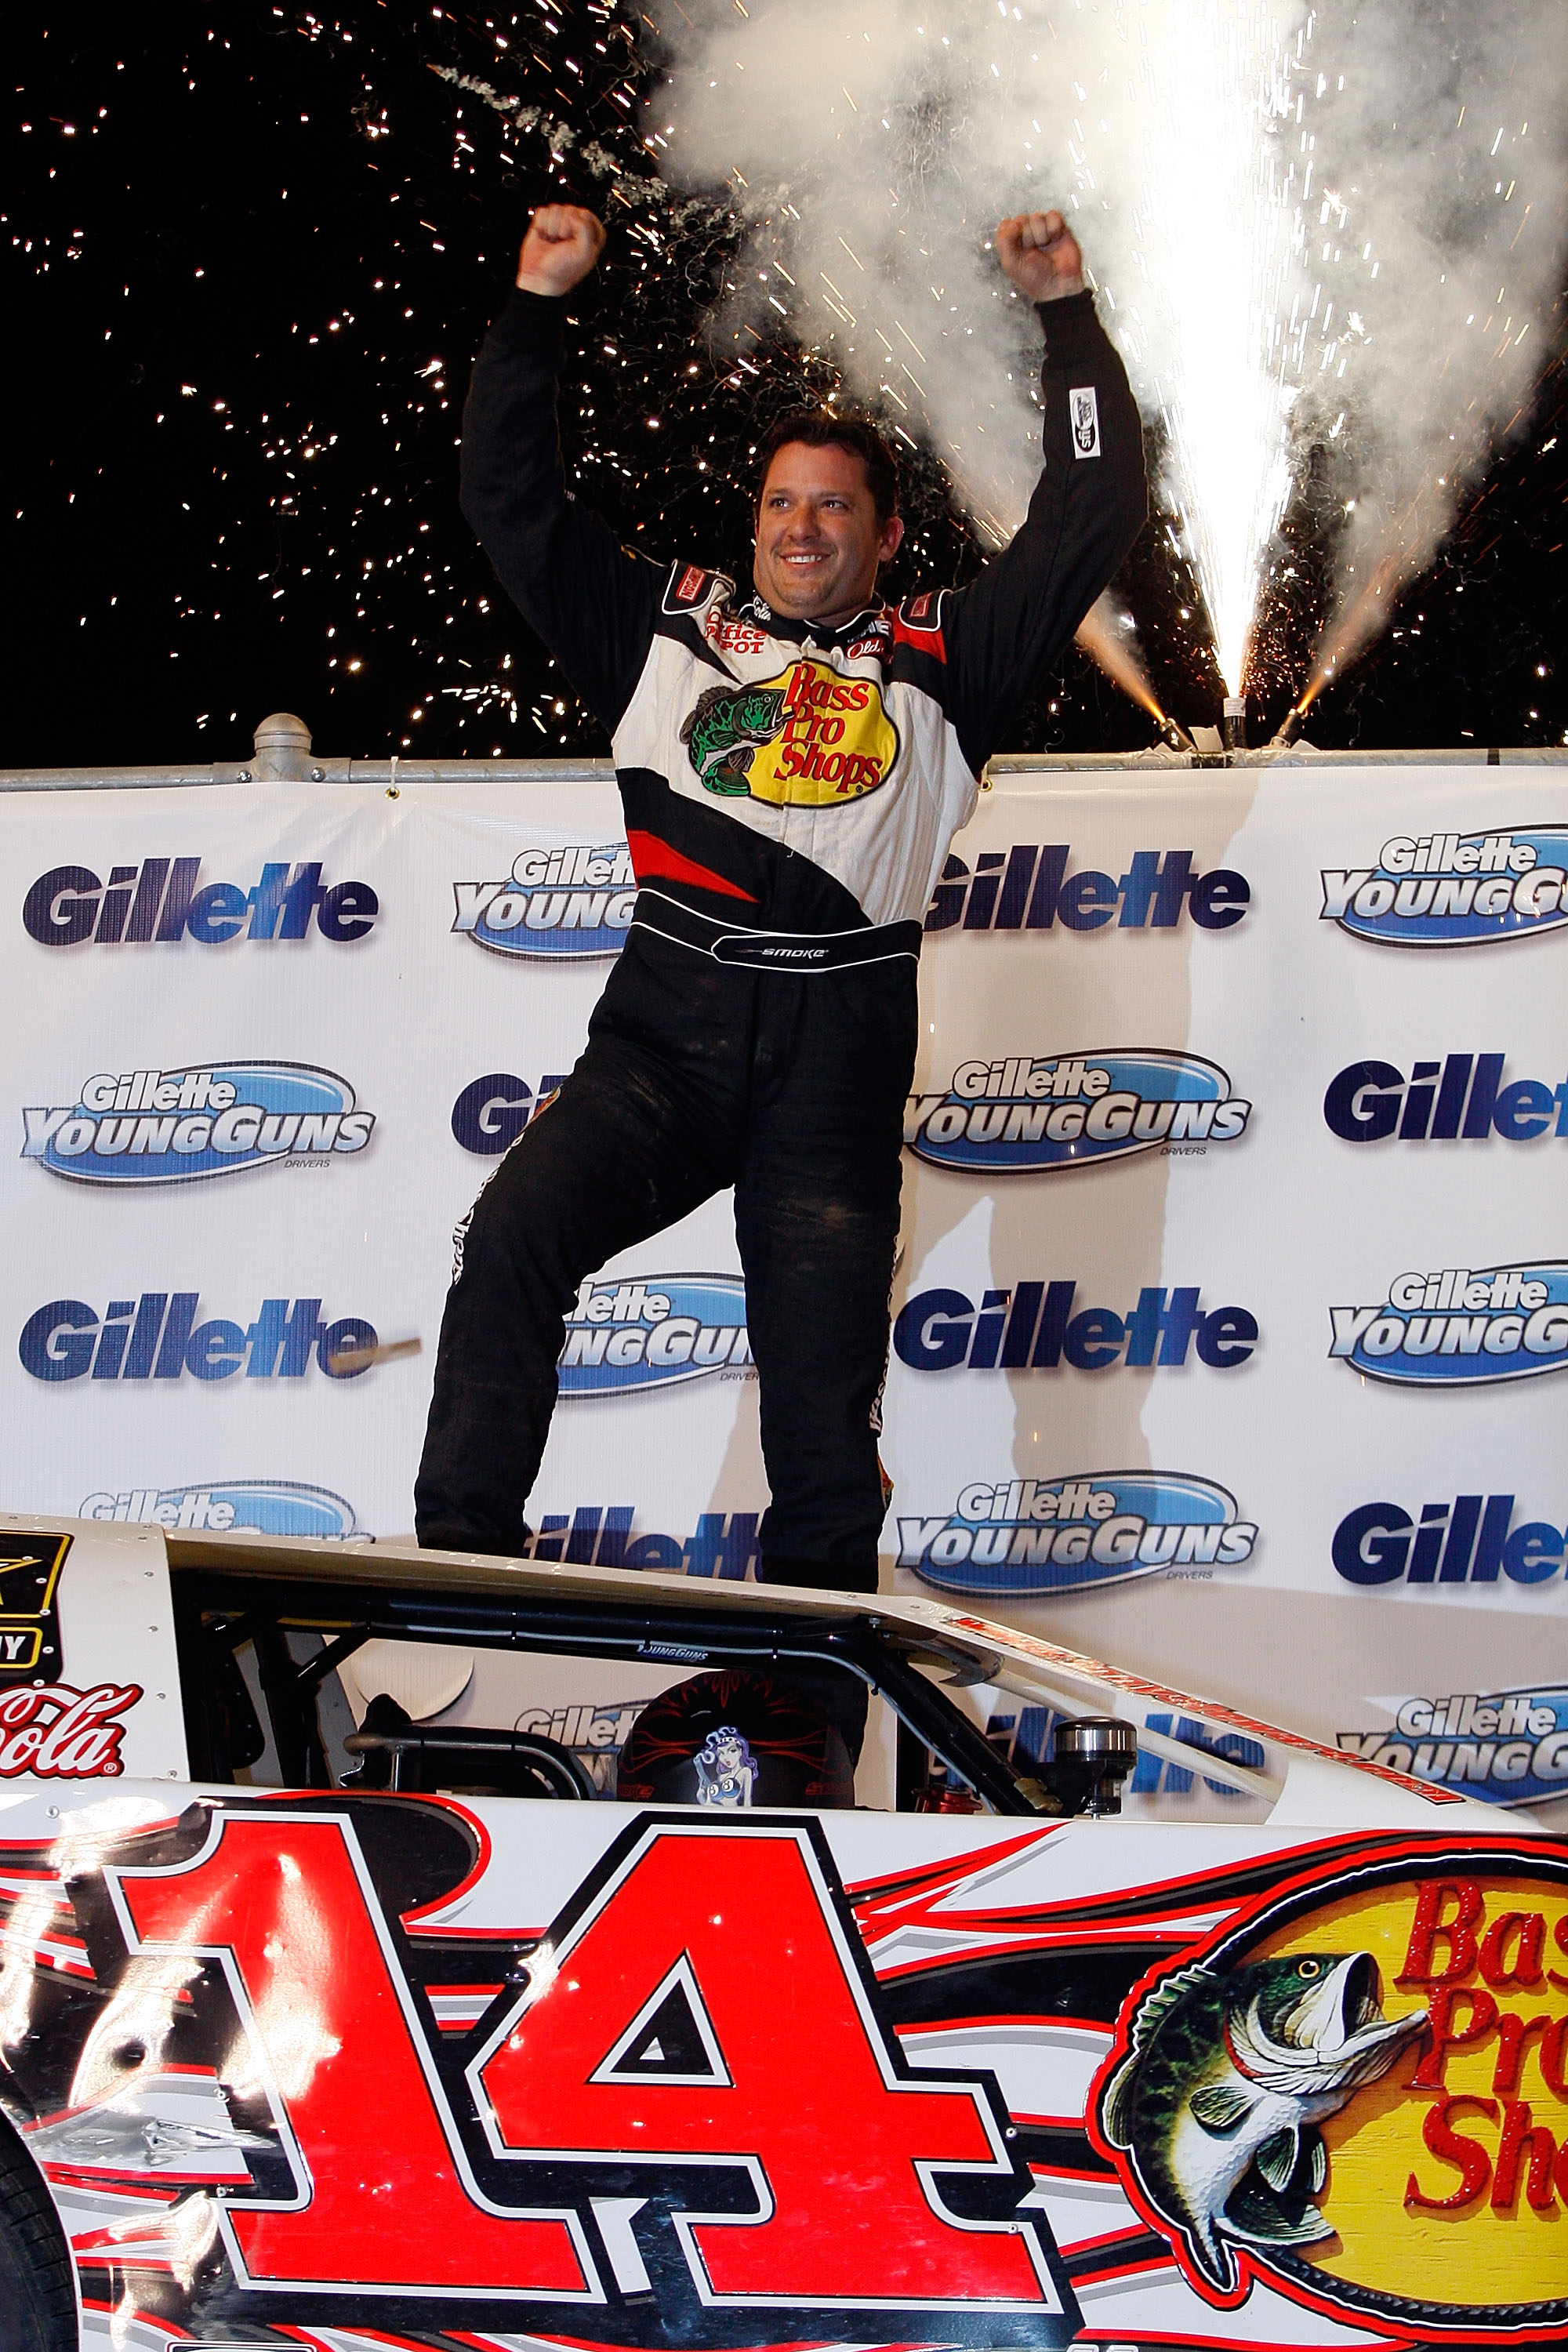 ROSSBURG, OH - SEPTEMBER 09:  Tony Stewart, driver of the #14 celebrates after winning the Gillette Young Guns Prelude to the Dream at Eldora Speedway on September 9, 2009 in Rossburg, Ohio.  (Photo by Chris Graythen/Getty Images for True Speed Communicat